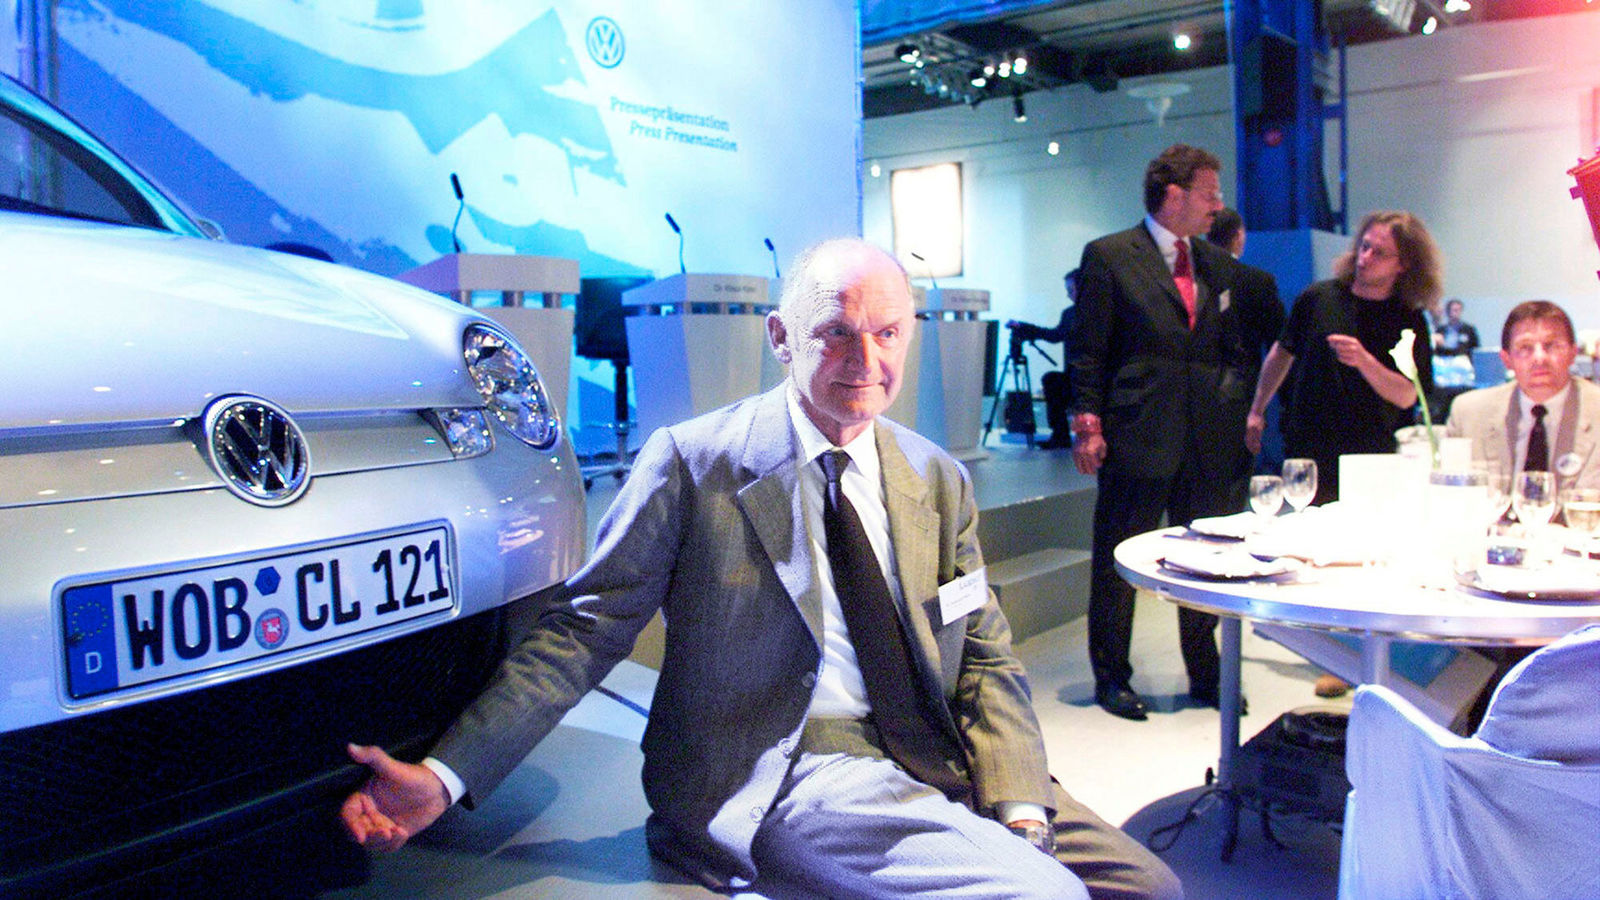 Prof. Dr. Ferdinand Piëch: “All I ever wanted to do was build cars”